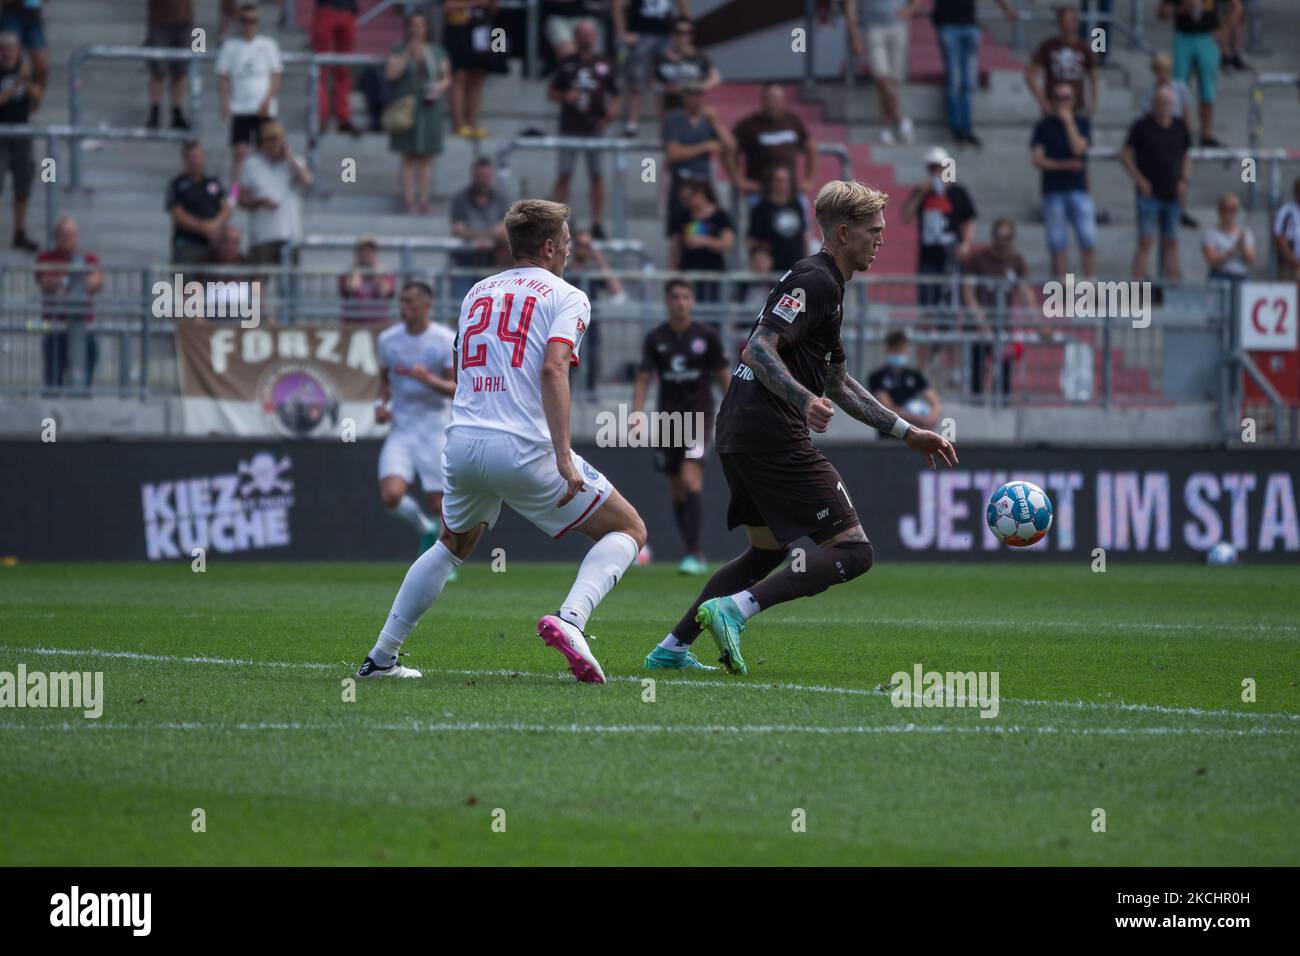 Simon Makienok (right) of FC St. Pauli and Hauke Wahl (left) of Holstein Kiel battle for the ball during the Second Bundesliga match between FC St. Pauli and Holstein Kiel at Millerntor-Stadium on July 25, 2021 in Hamburg, Germany. (Photo by Peter Niedung/NurPhoto) Stock Photo